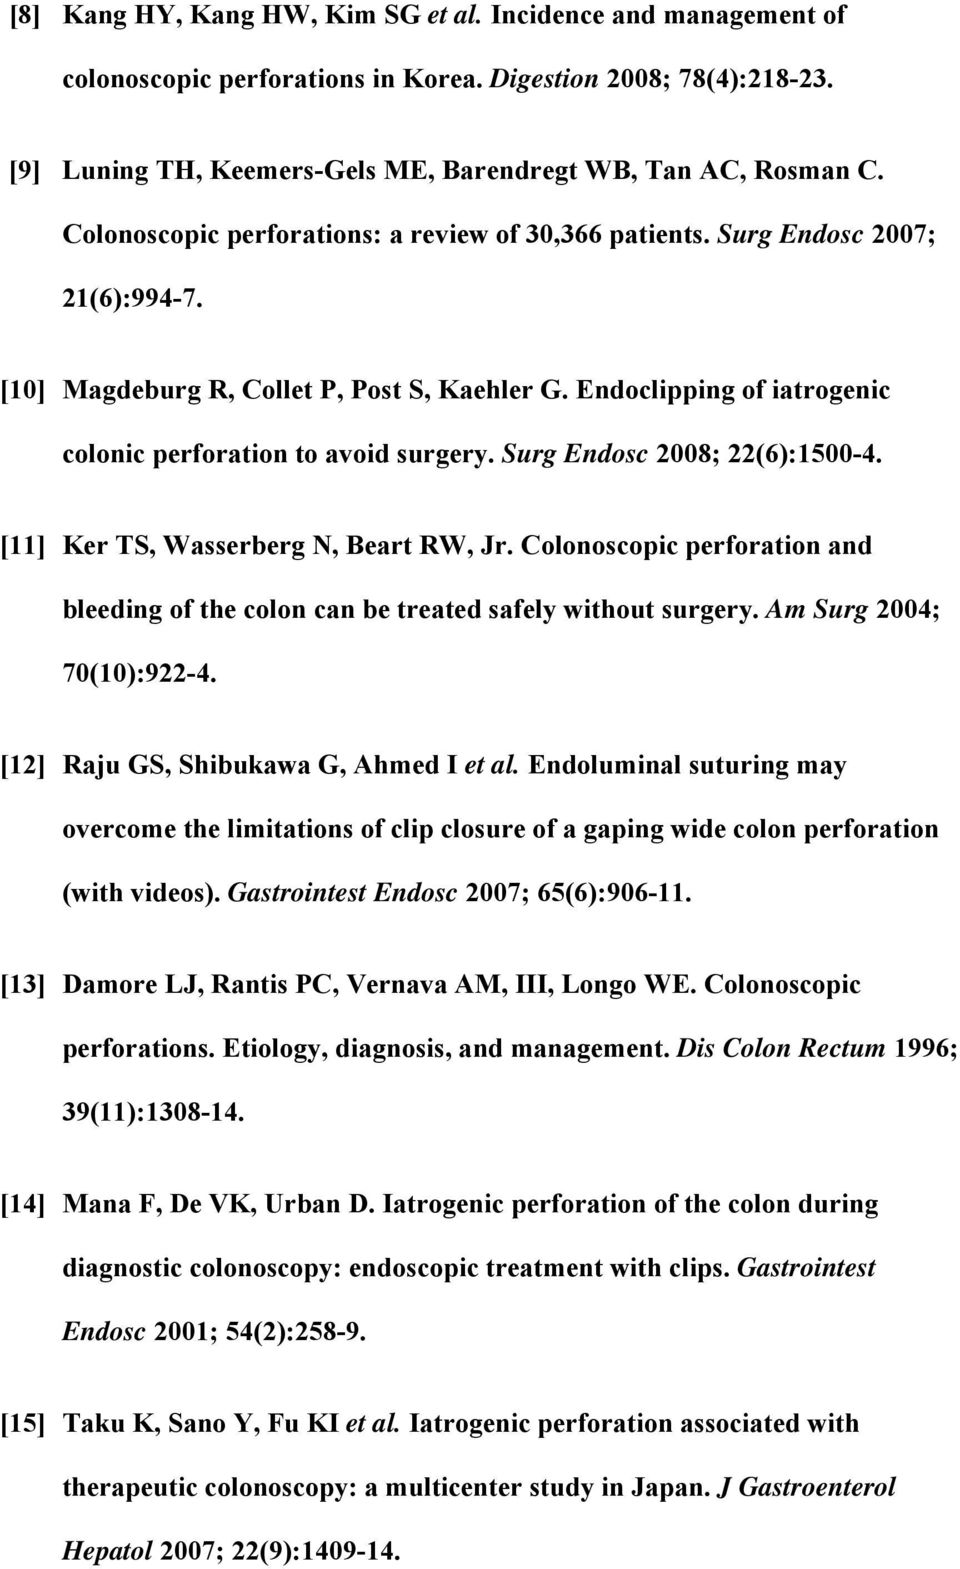 Surg Endosc 2008; 22(6):1500-4. [11] Ker TS, Wasserberg N, Beart RW, Jr. Colonoscopic perforation and bleeding of the colon can be treated safely without surgery. Am Surg 2004; 70(10):922-4.